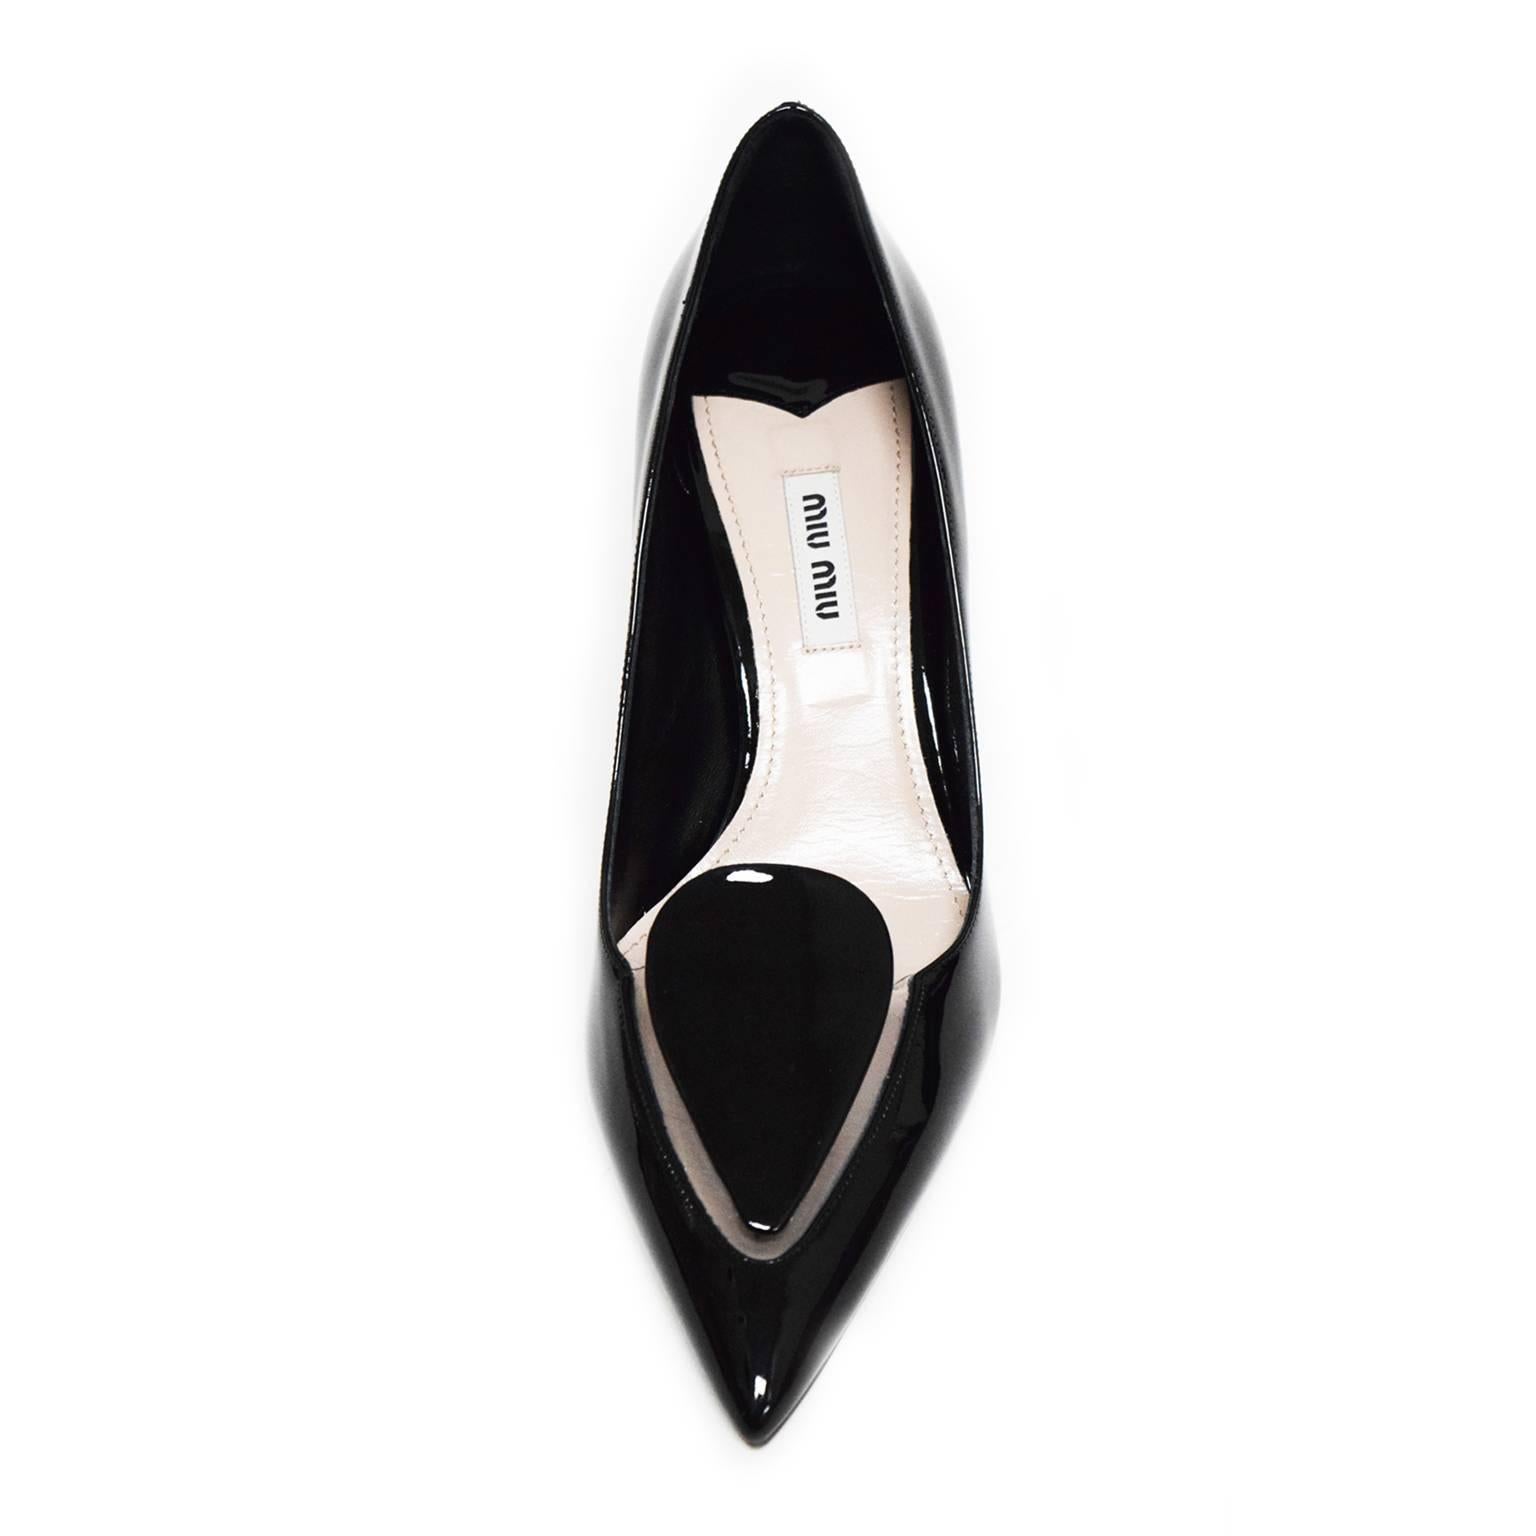 These Sleek and Classic Miu Miu Kitten Heels are incased with powerful black patent leather, with a clear PVC cut out located on the toe box to create  a slimming sleek jewel like shape. The lining is fully covered in blush soft leather and has the